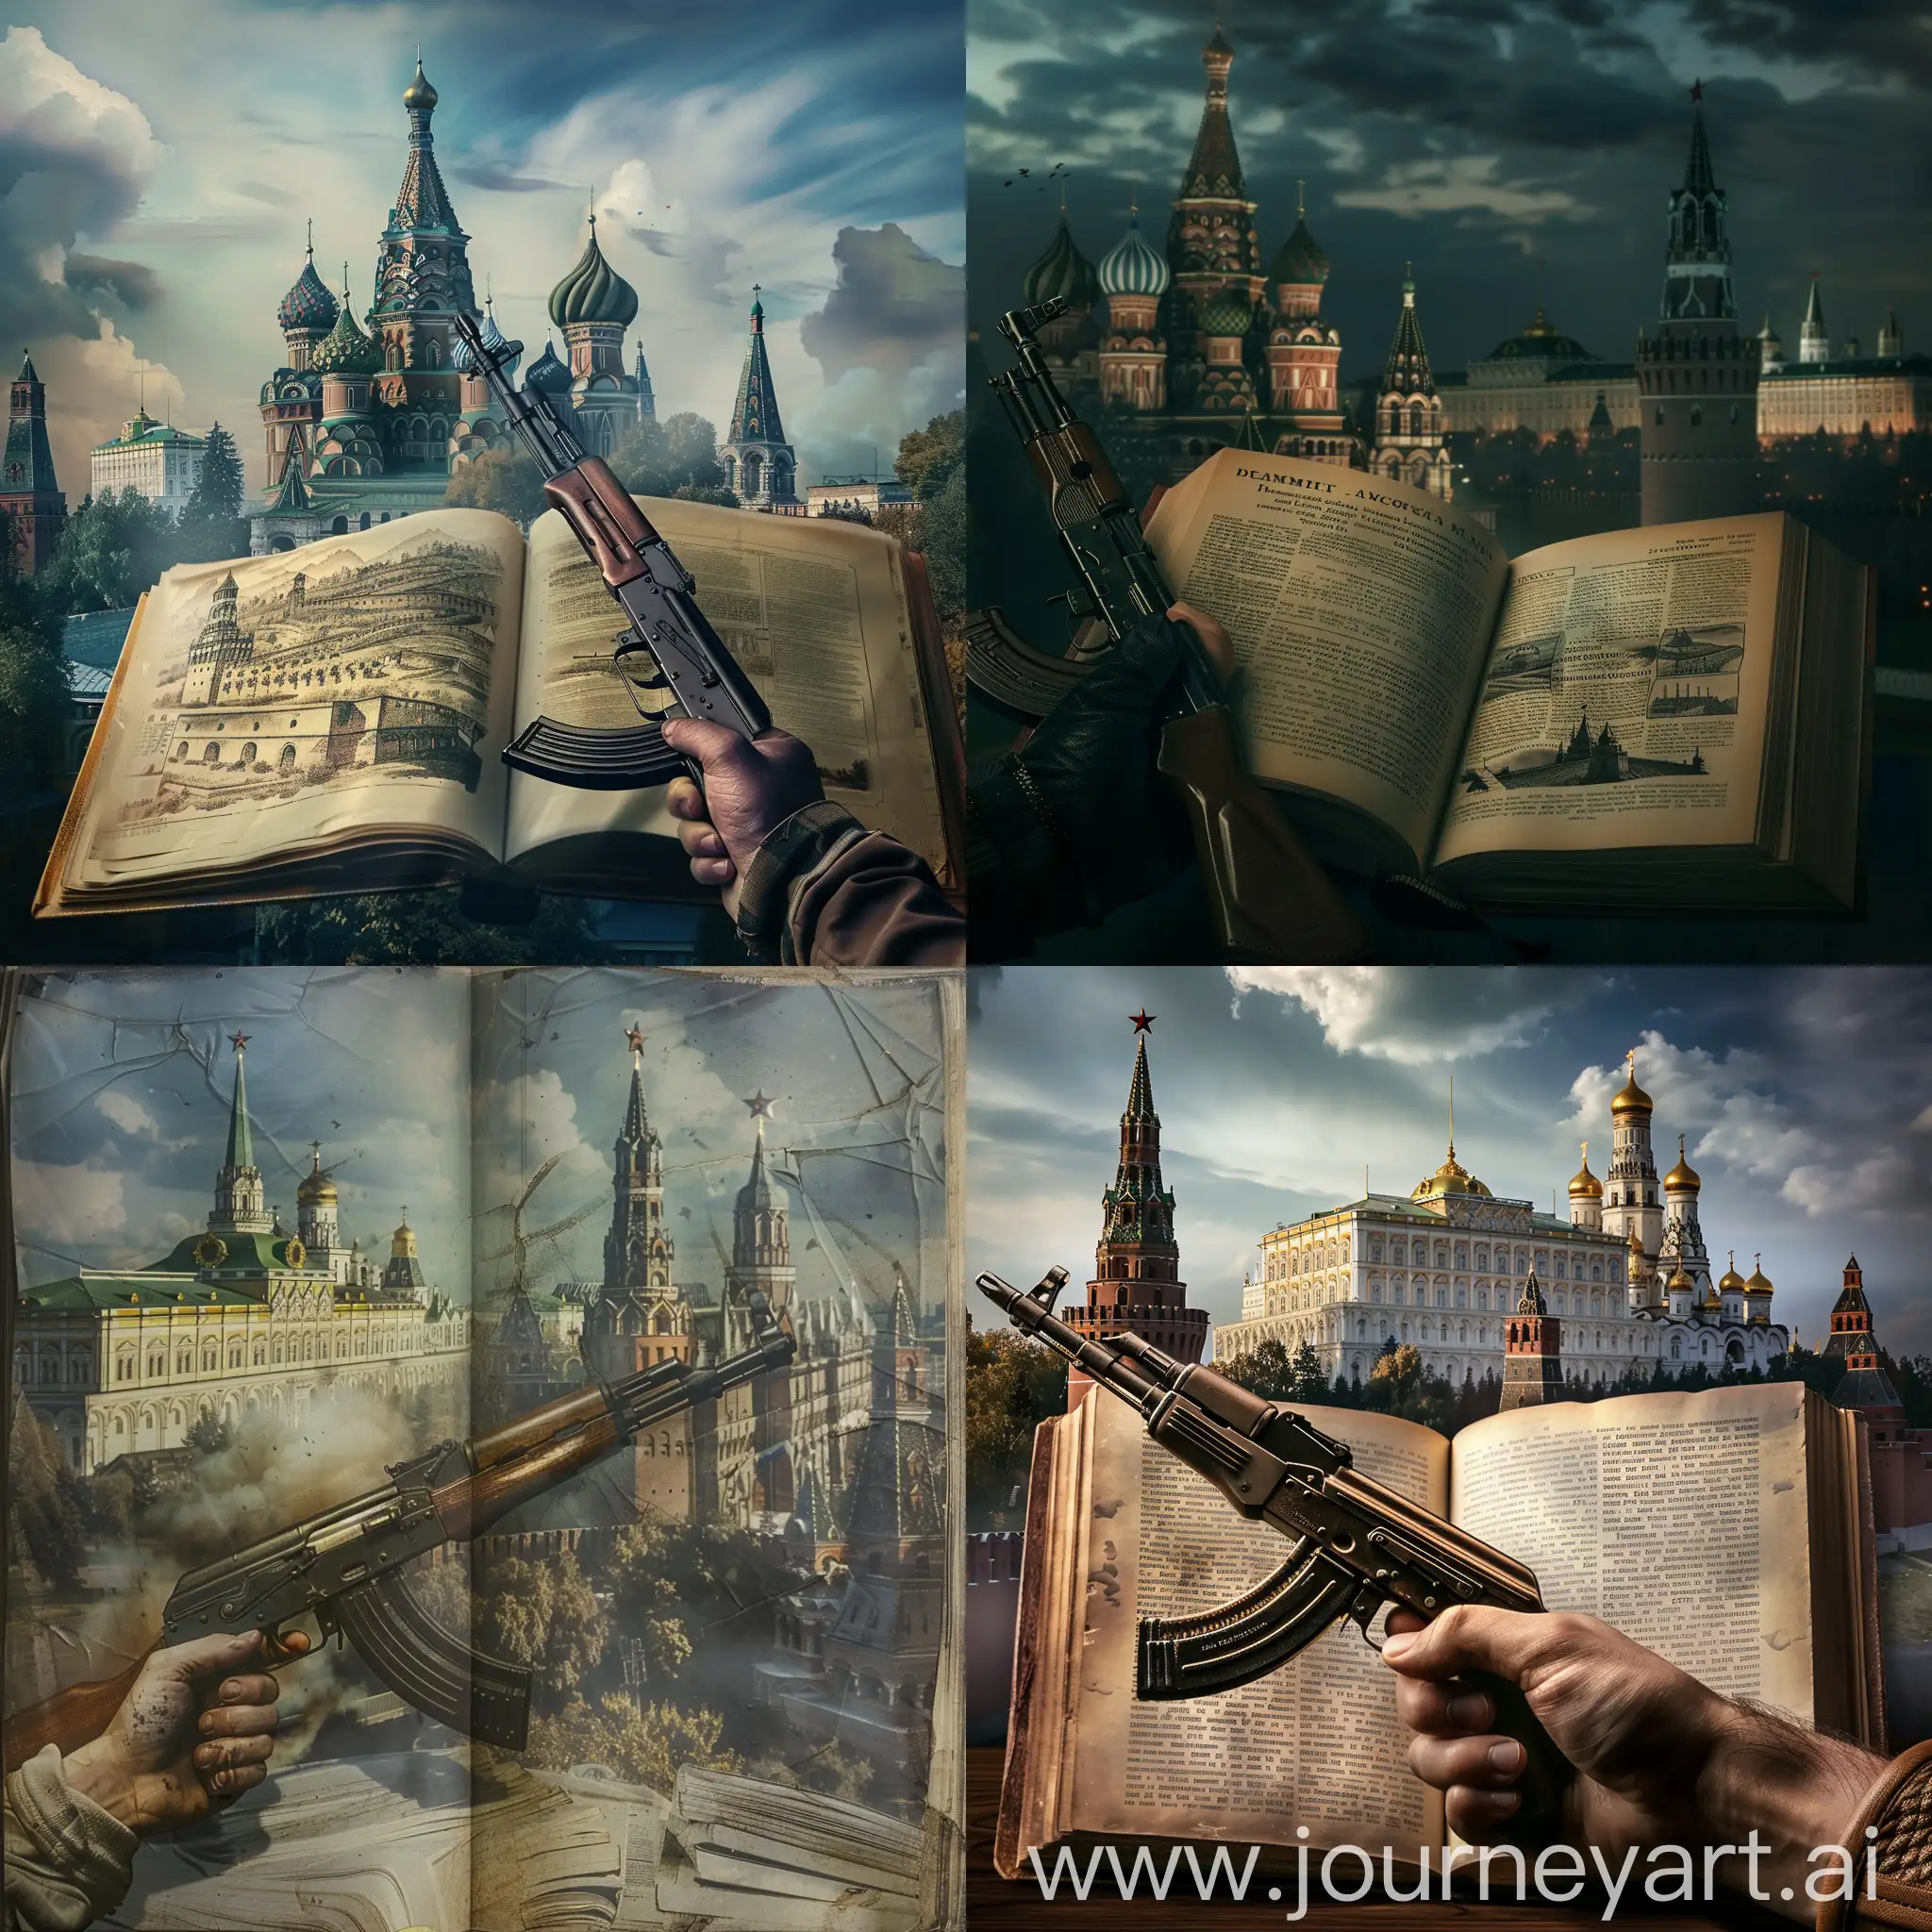 Revolutionary-Vision-Dream-Book-with-AK47-at-the-Kremlin